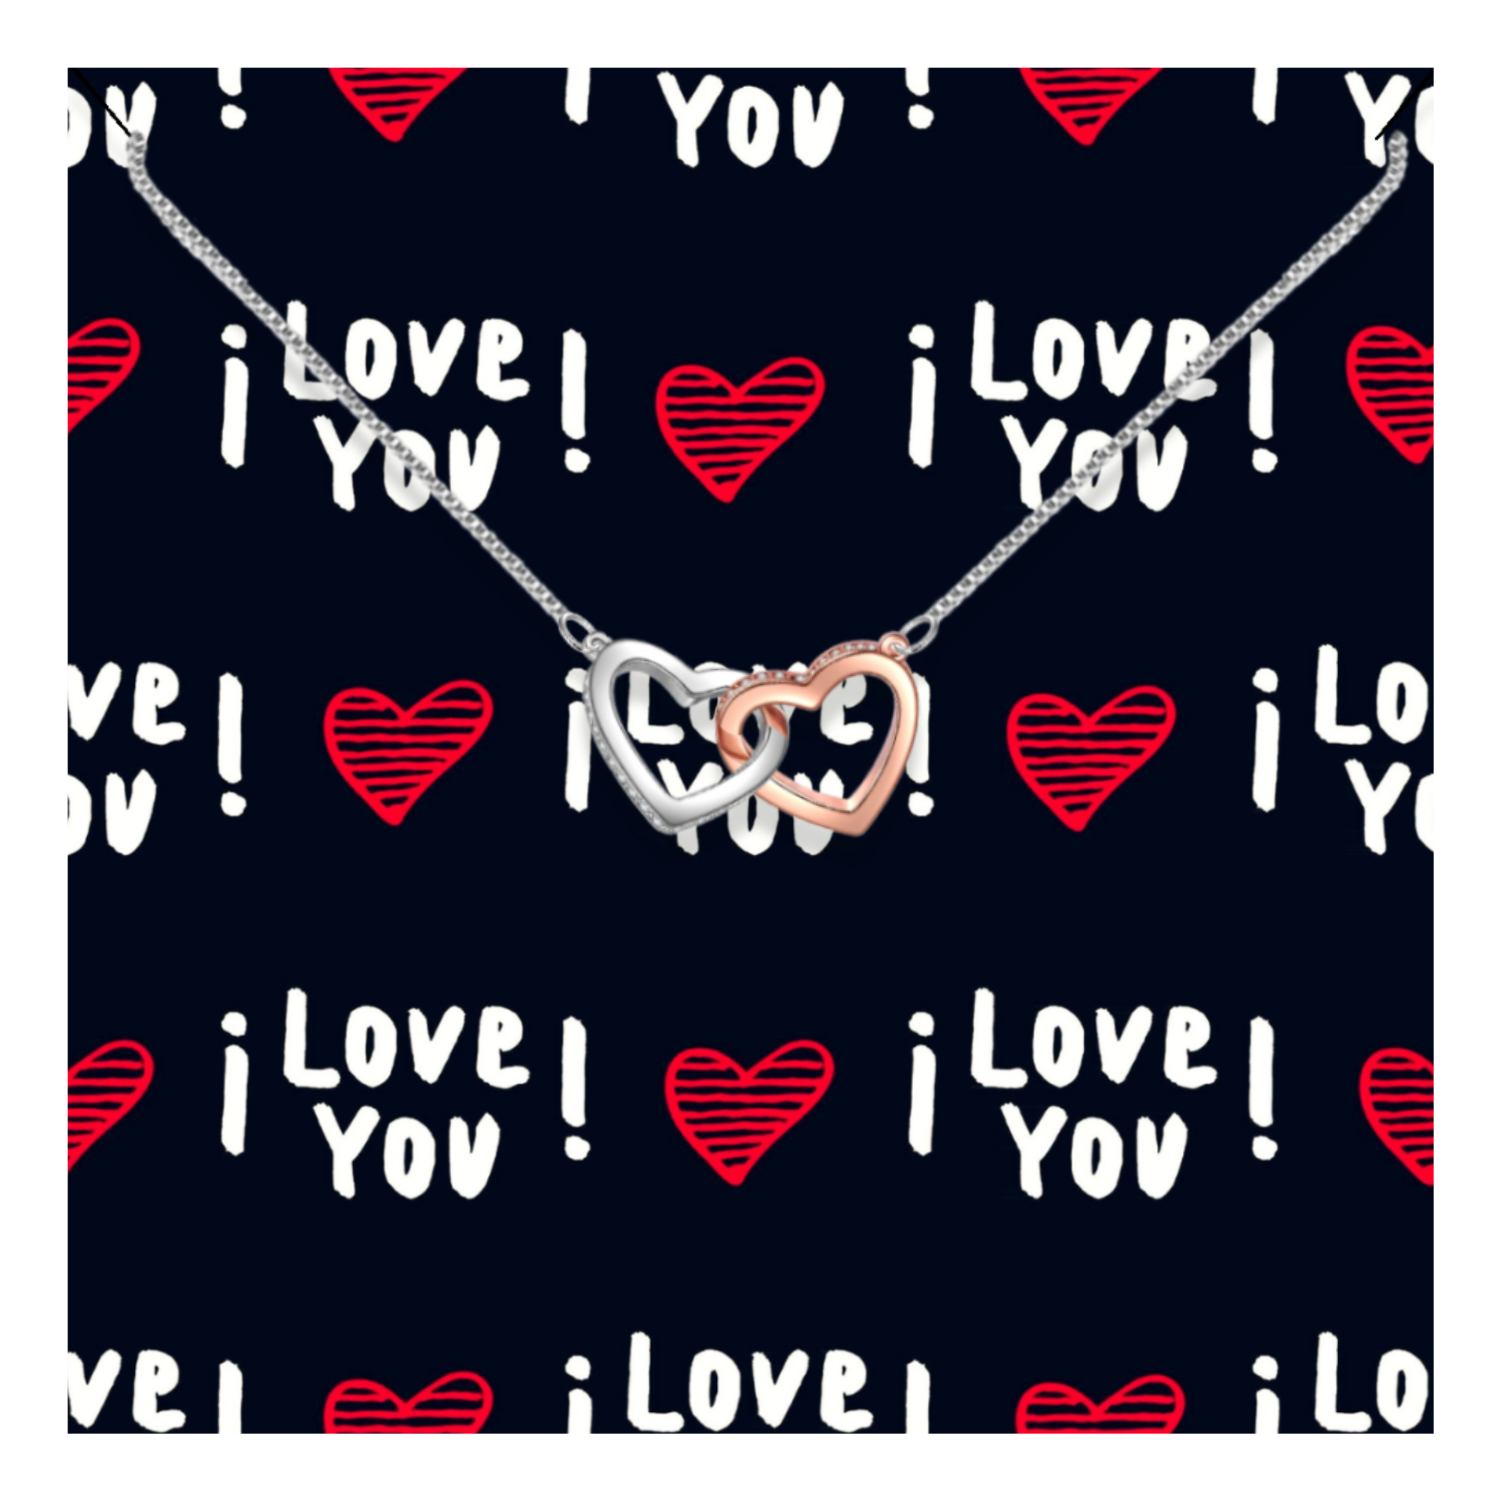 Personalized Necklaces - I Love You Necklace 